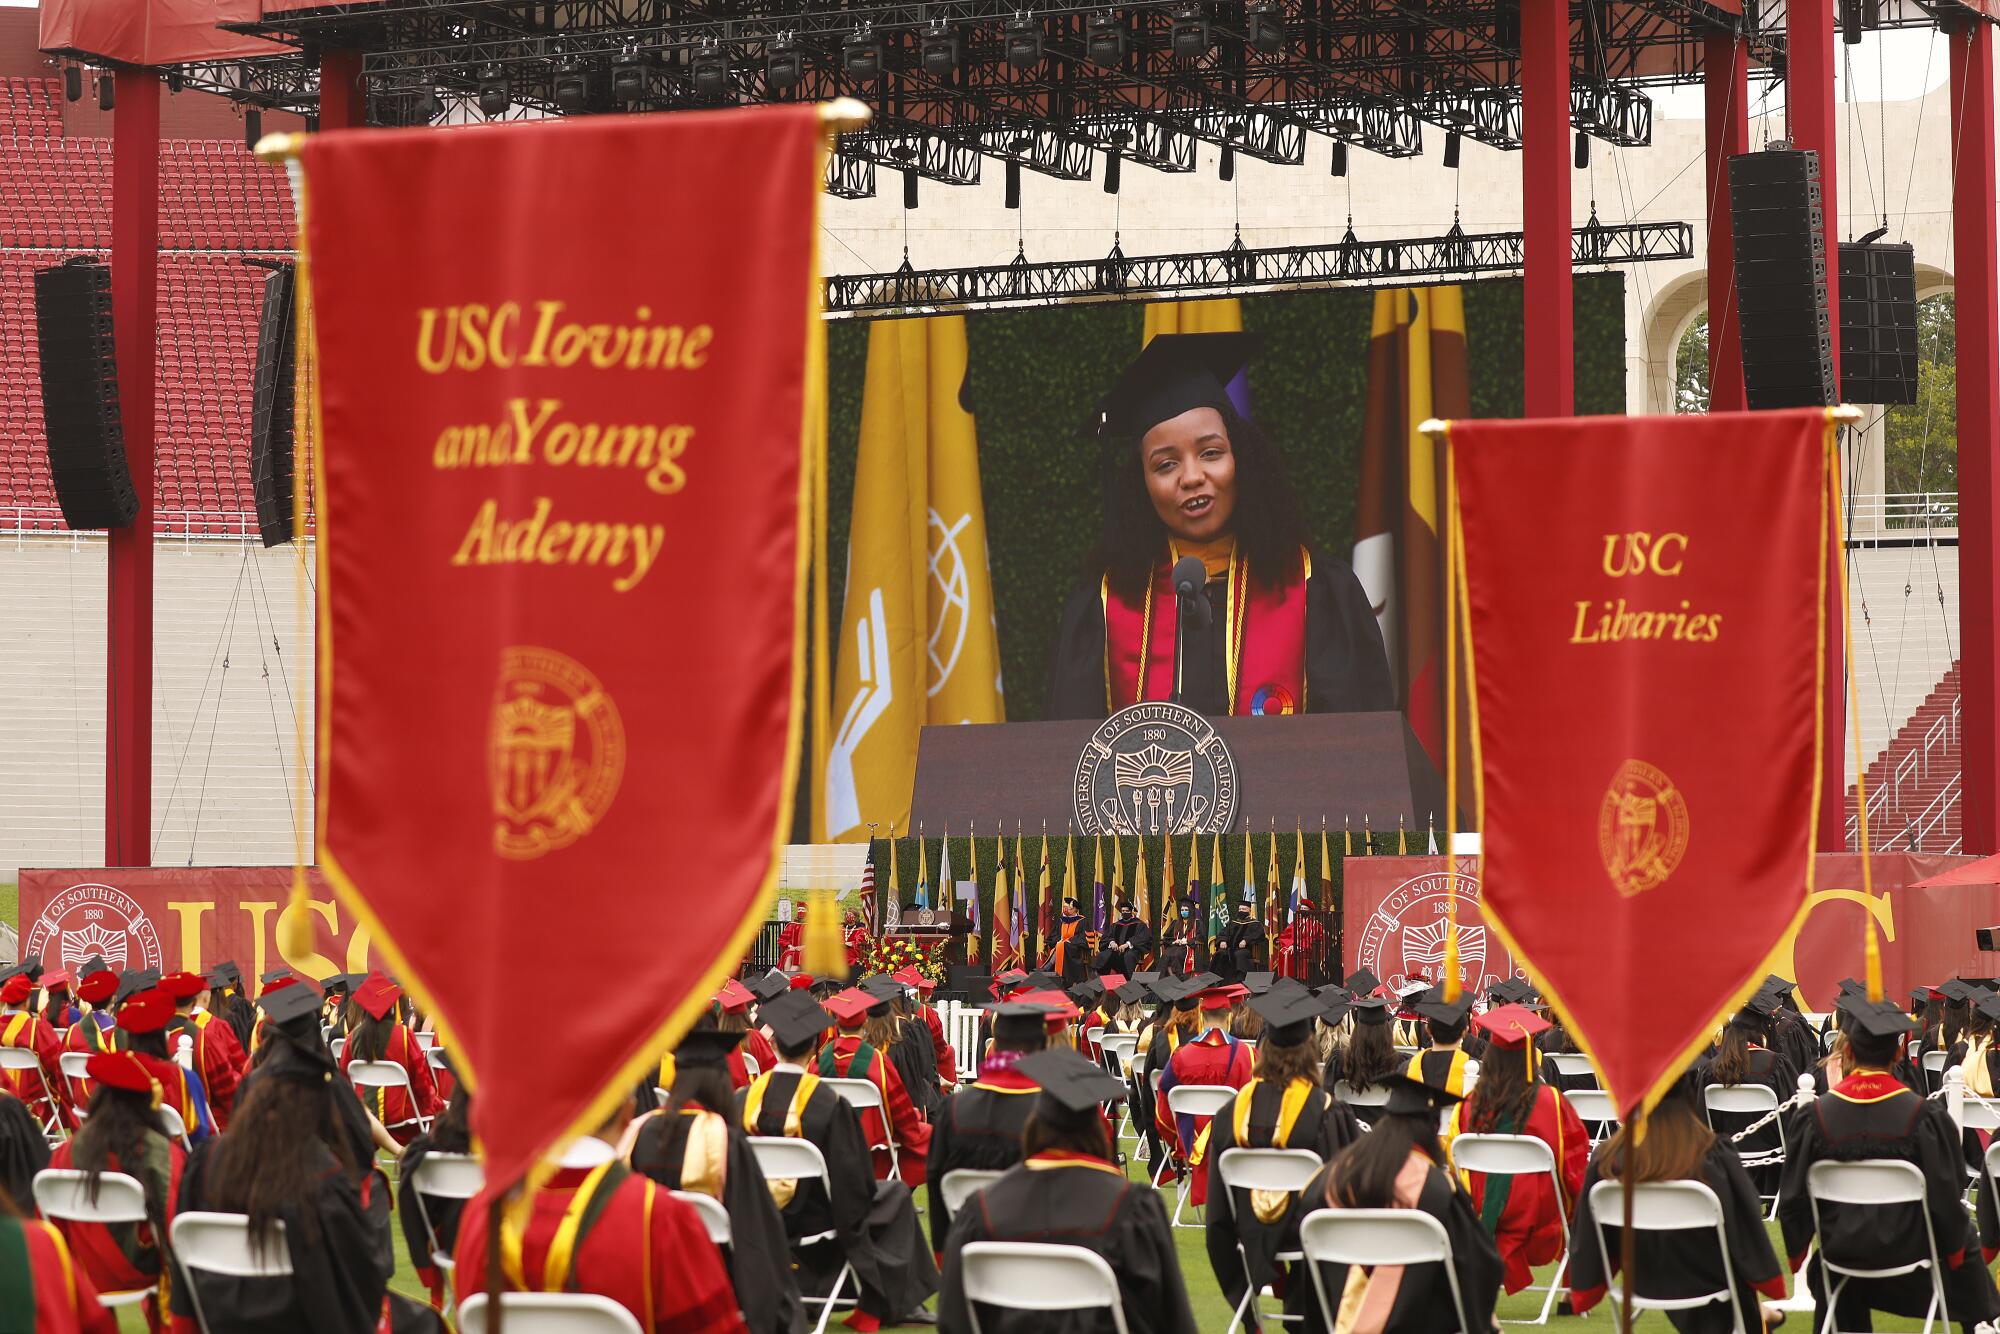 A large screen behind the graduation stage shows a student in a black gown and red sash giving a speech